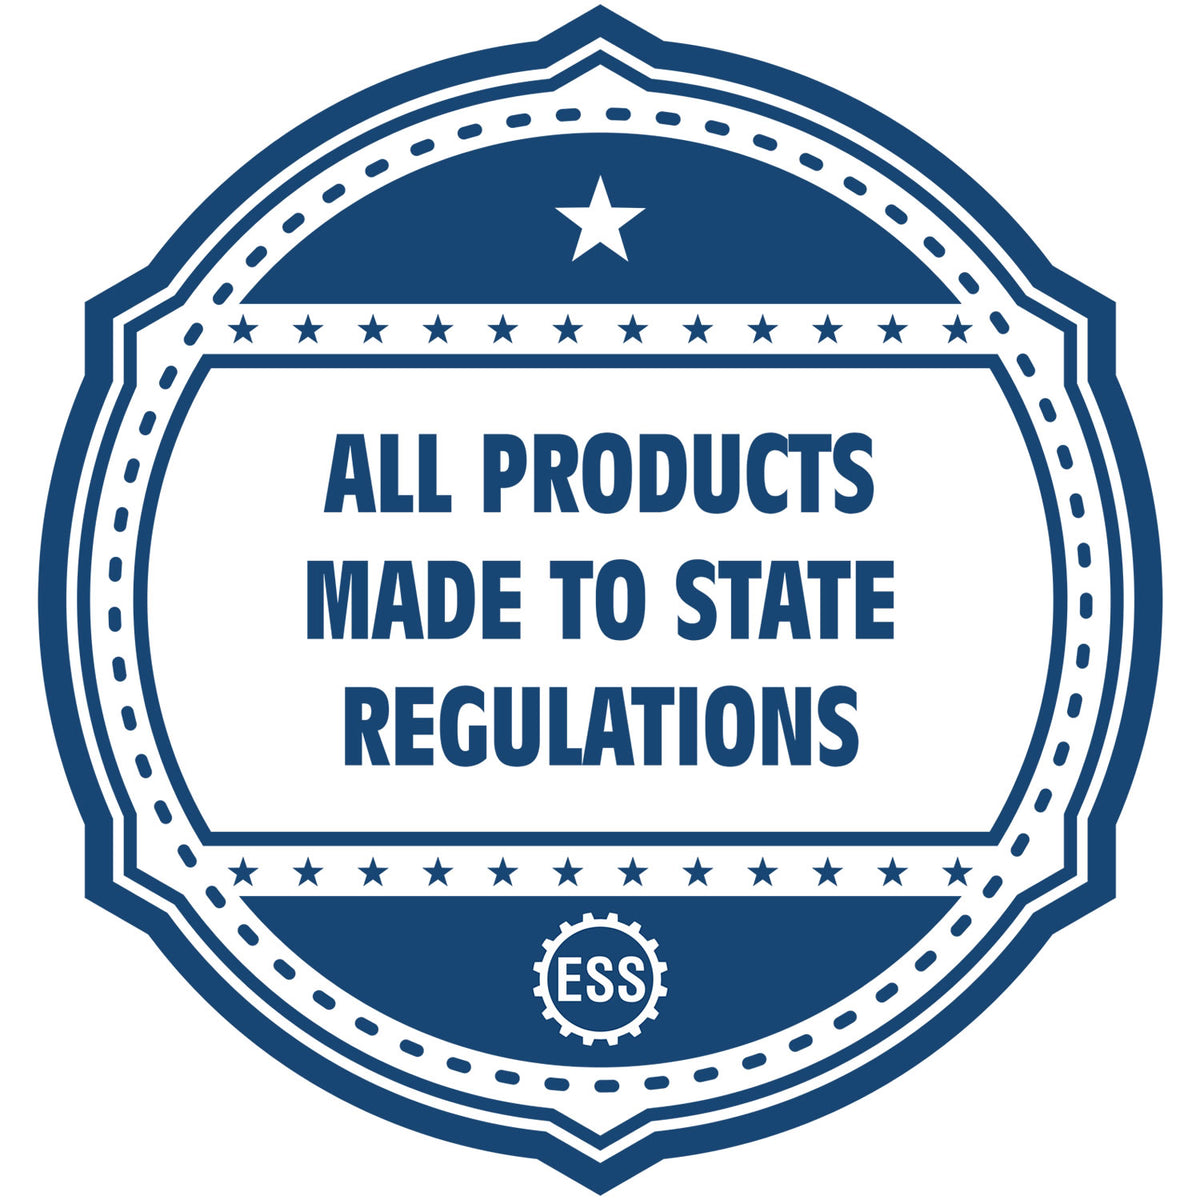 An icon or badge element for the Slim Pre-Inked Delaware Professional Engineer Seal Stamp showing that this product is made in compliance with state regulations.